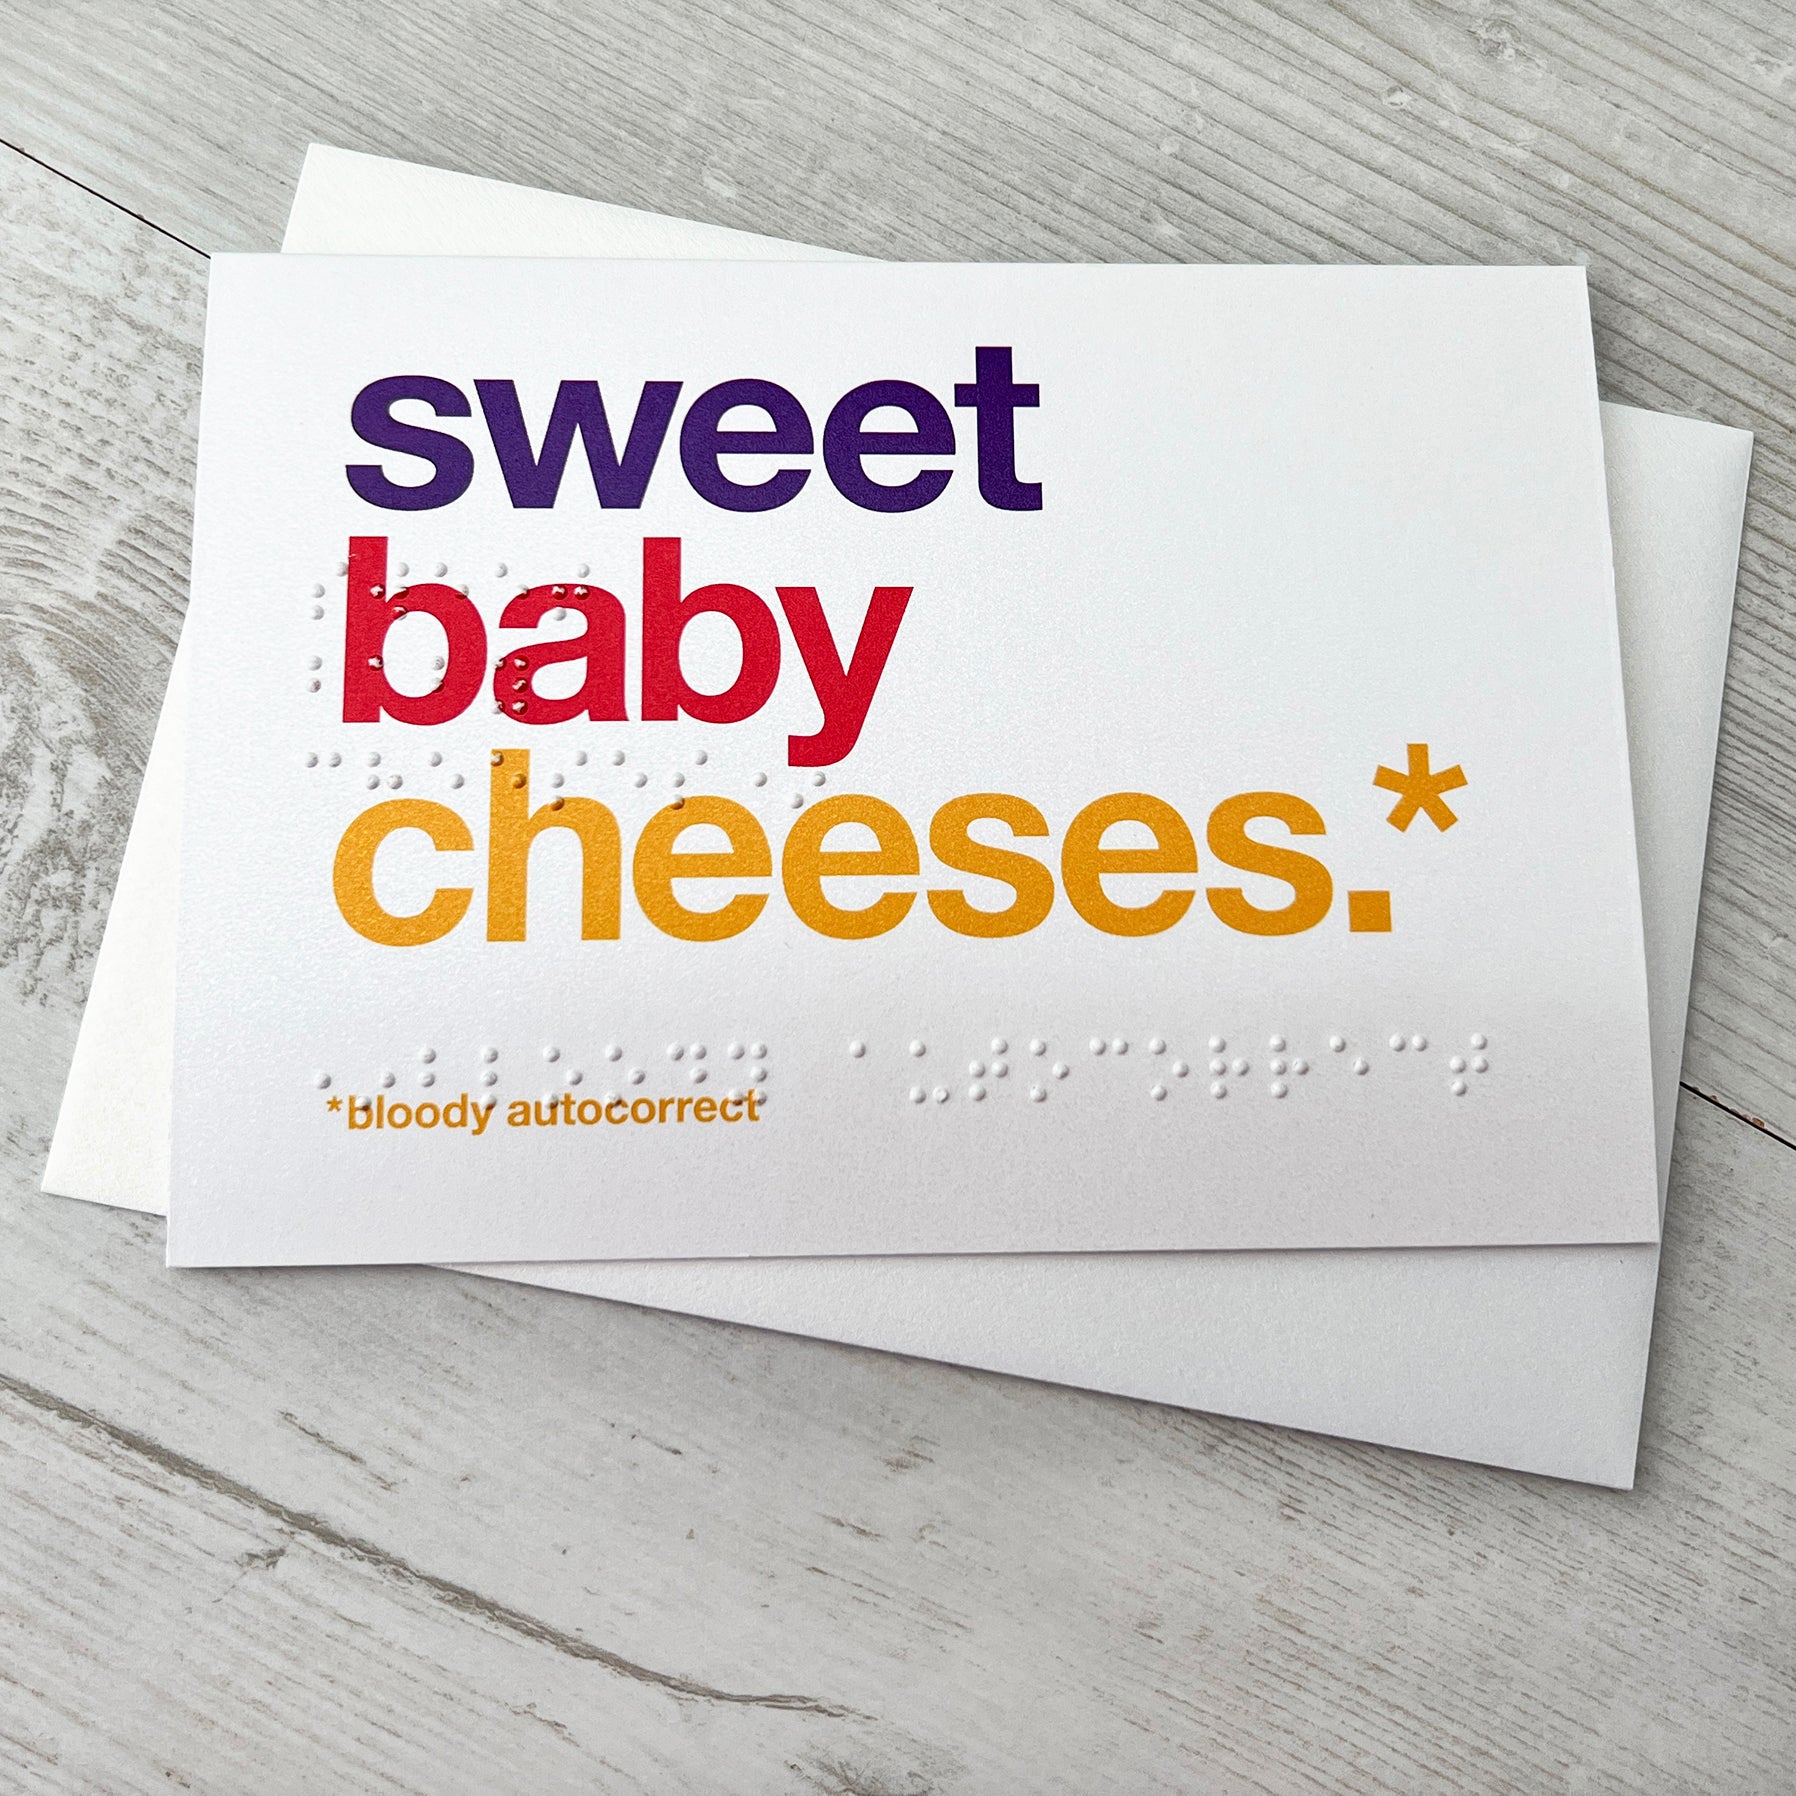 A white card with colourful text saying sweet baby cheeses.* *bloody autocorrect with braille saying the same.